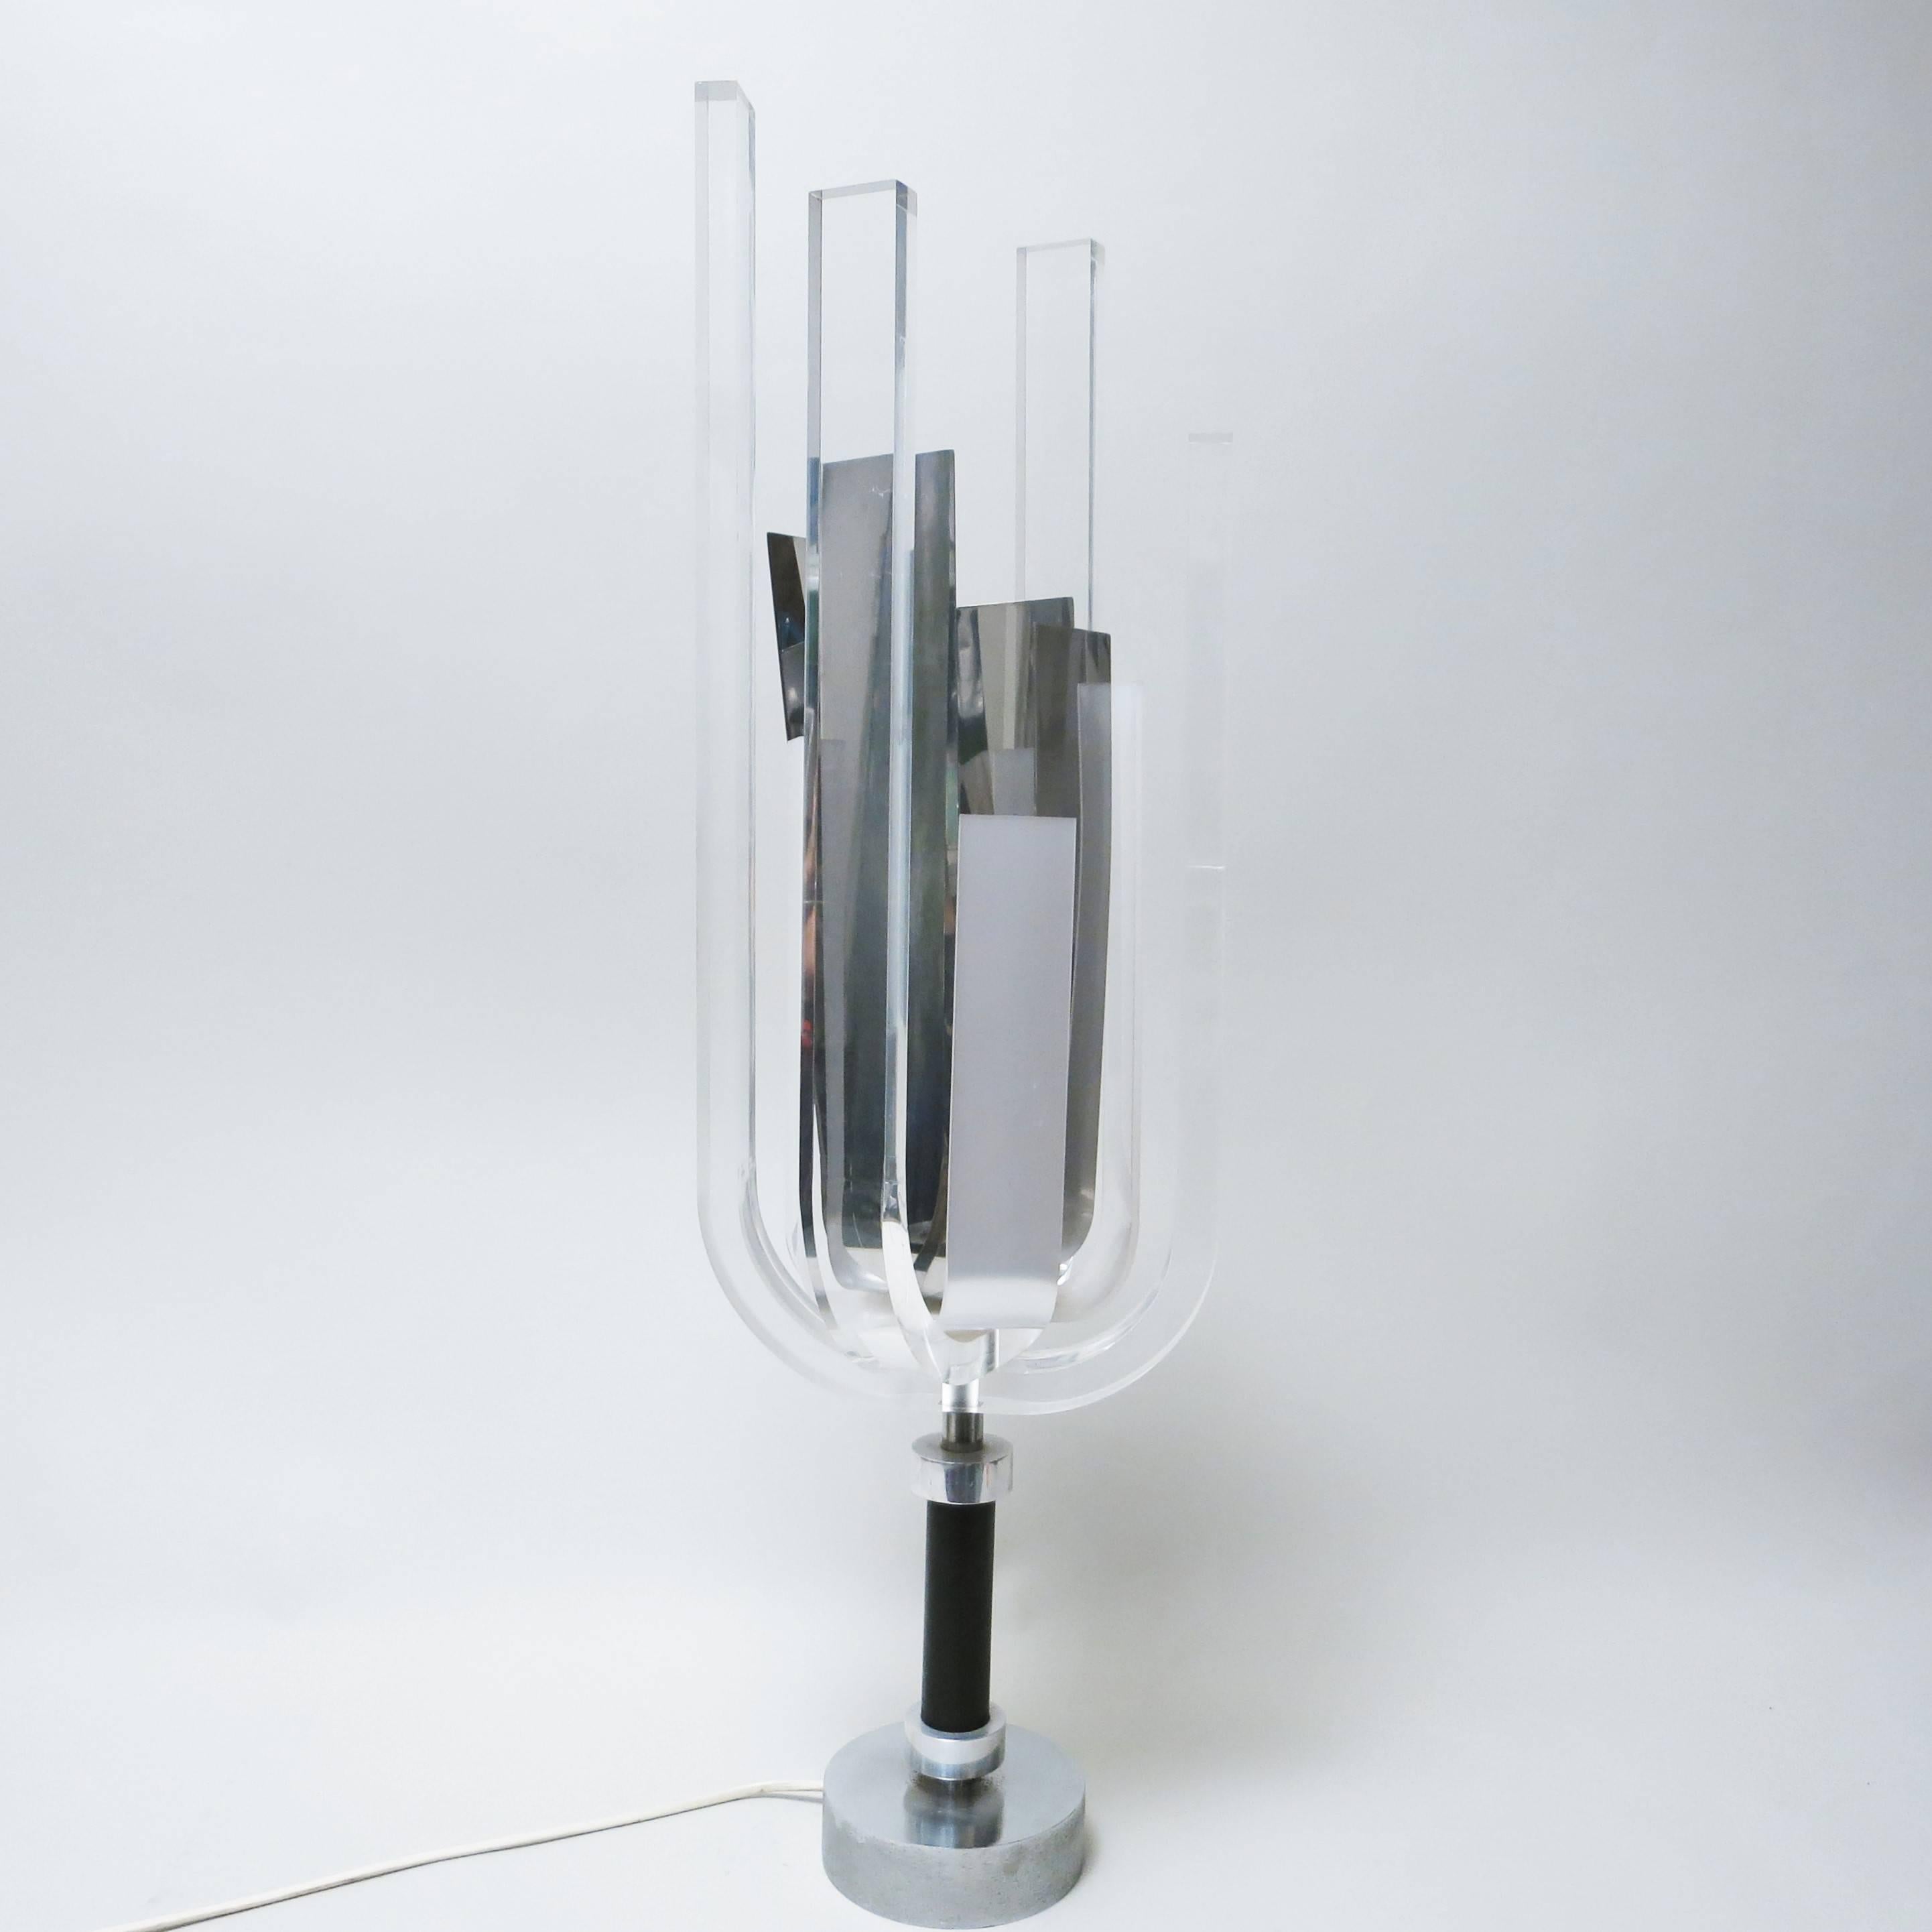 A rare Mid-Century Modern vintage Lucite and chrome lamp by the French sculptor Philippe Jean, circa 1970
The base is in a heavy brushed steel and black leather, the shade is matching large strips of chrome-plated metal, Lucite and white acryl.